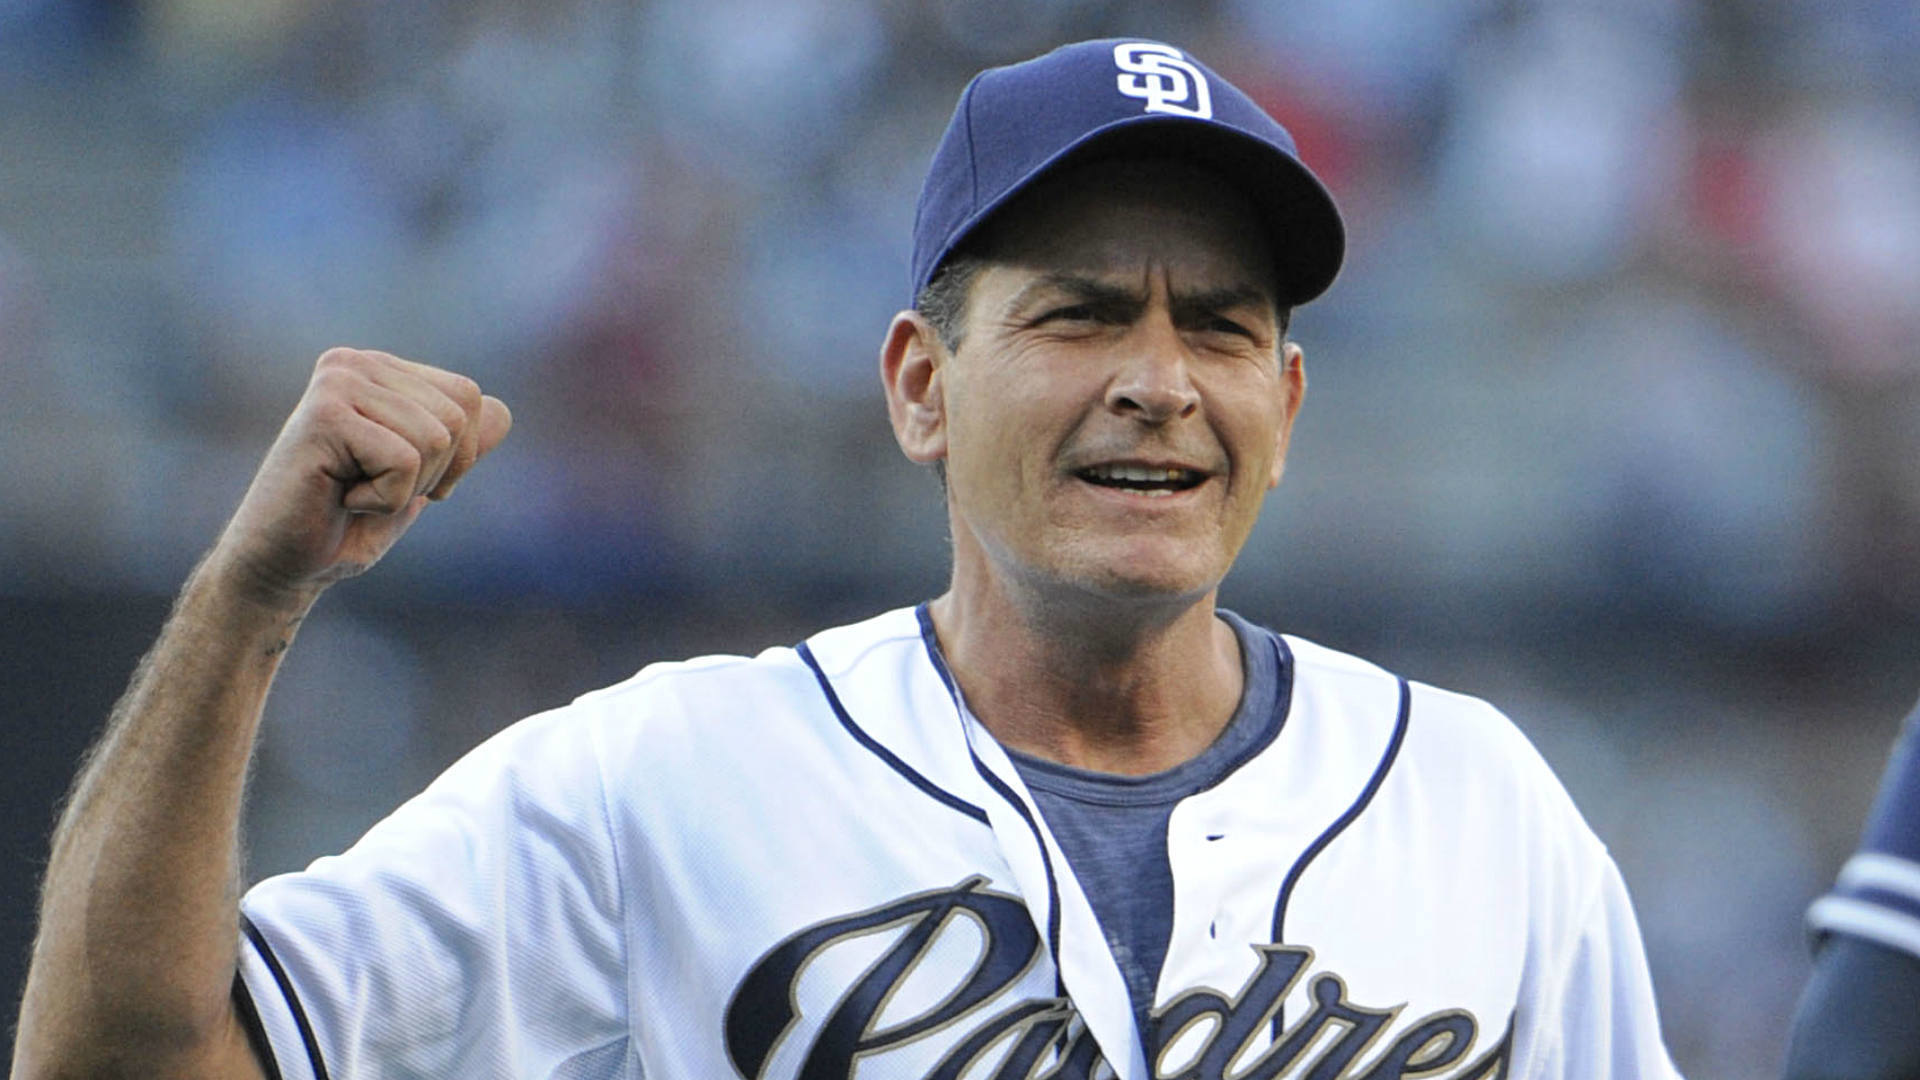 Charlie Sheen once bought 2,600 seats at a baseball game so he could ensure he'd be the only one to catch a home run ball.